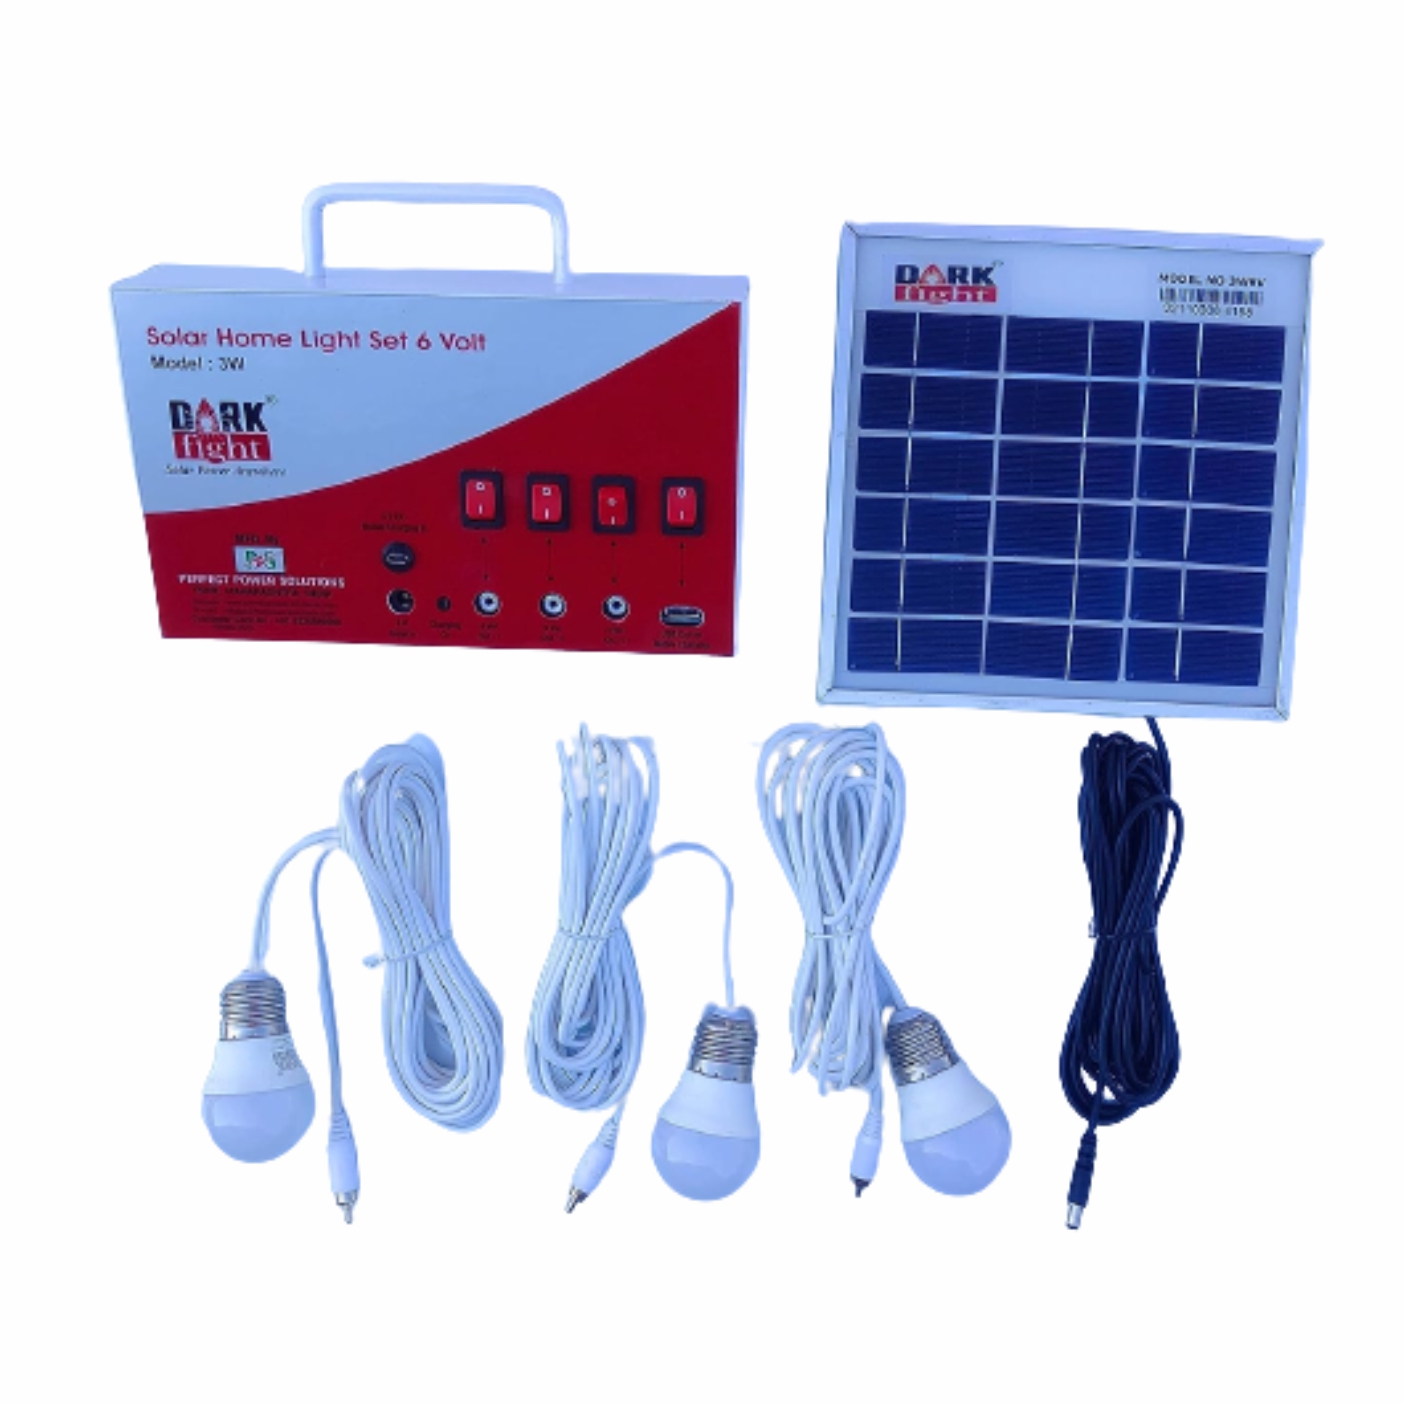 DARK FIGHT 6 Volt Solar Light Set with Strong Metal Powder Coating Body For Home / Office 